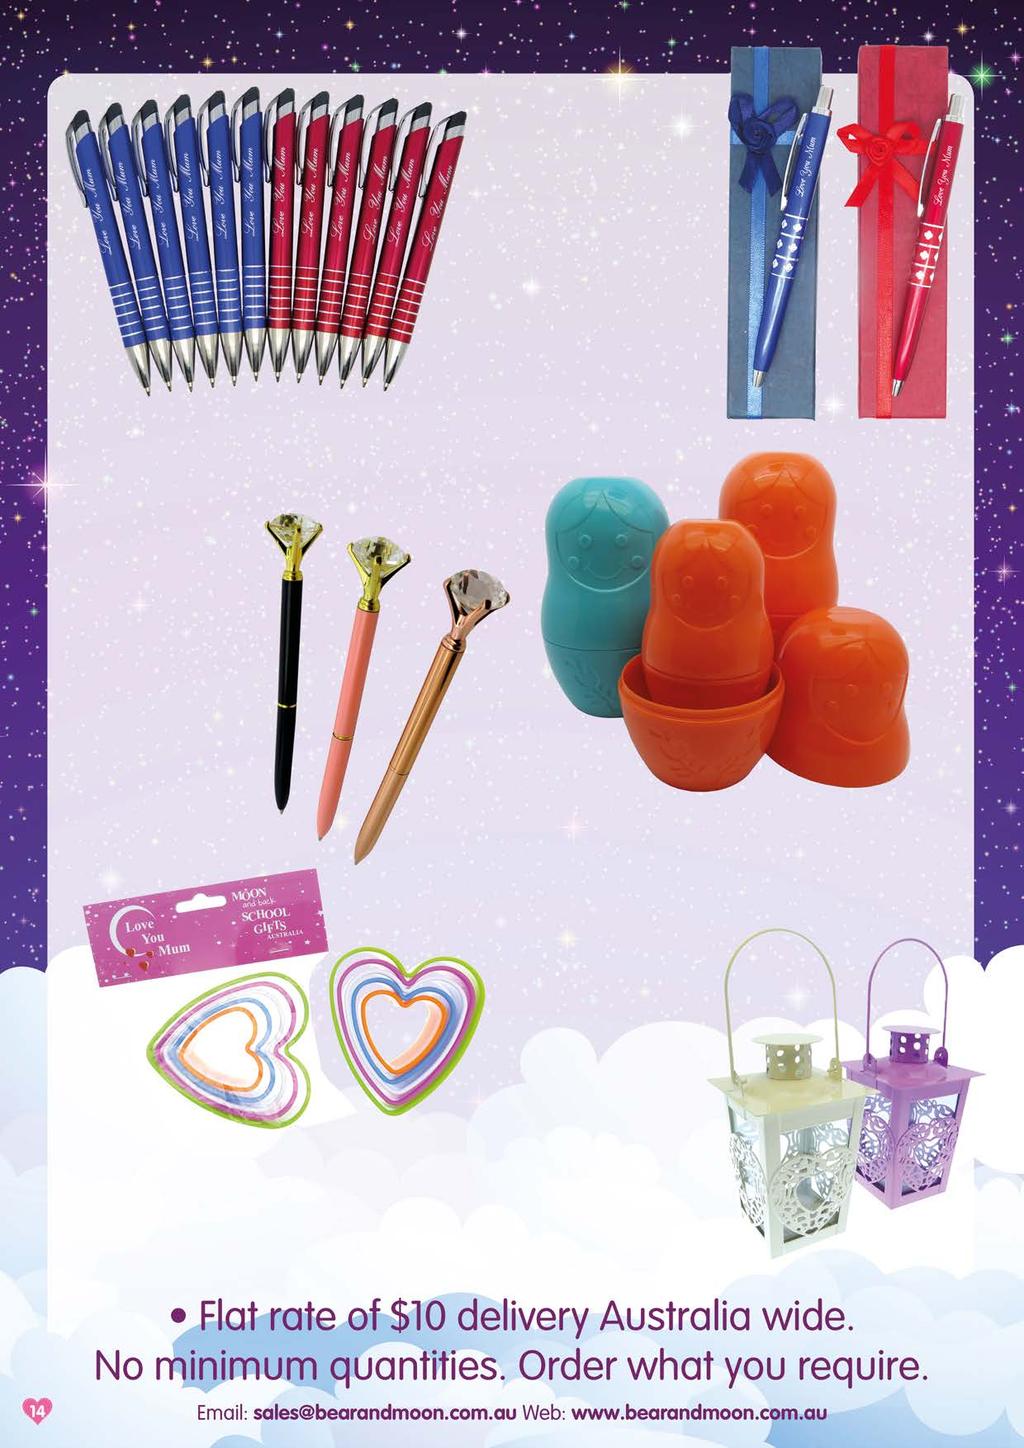 $ 1.80 DELUXE PEN MD1981 Love you Mum logo. Matching gift box. 12 PK EXECUTIVE PENS MD1980 Love you Mum logo. Two colours. 0.49c each. Cello bag. $ 5.90 $ 2.00 BLING PEN MD1982 Three colours.